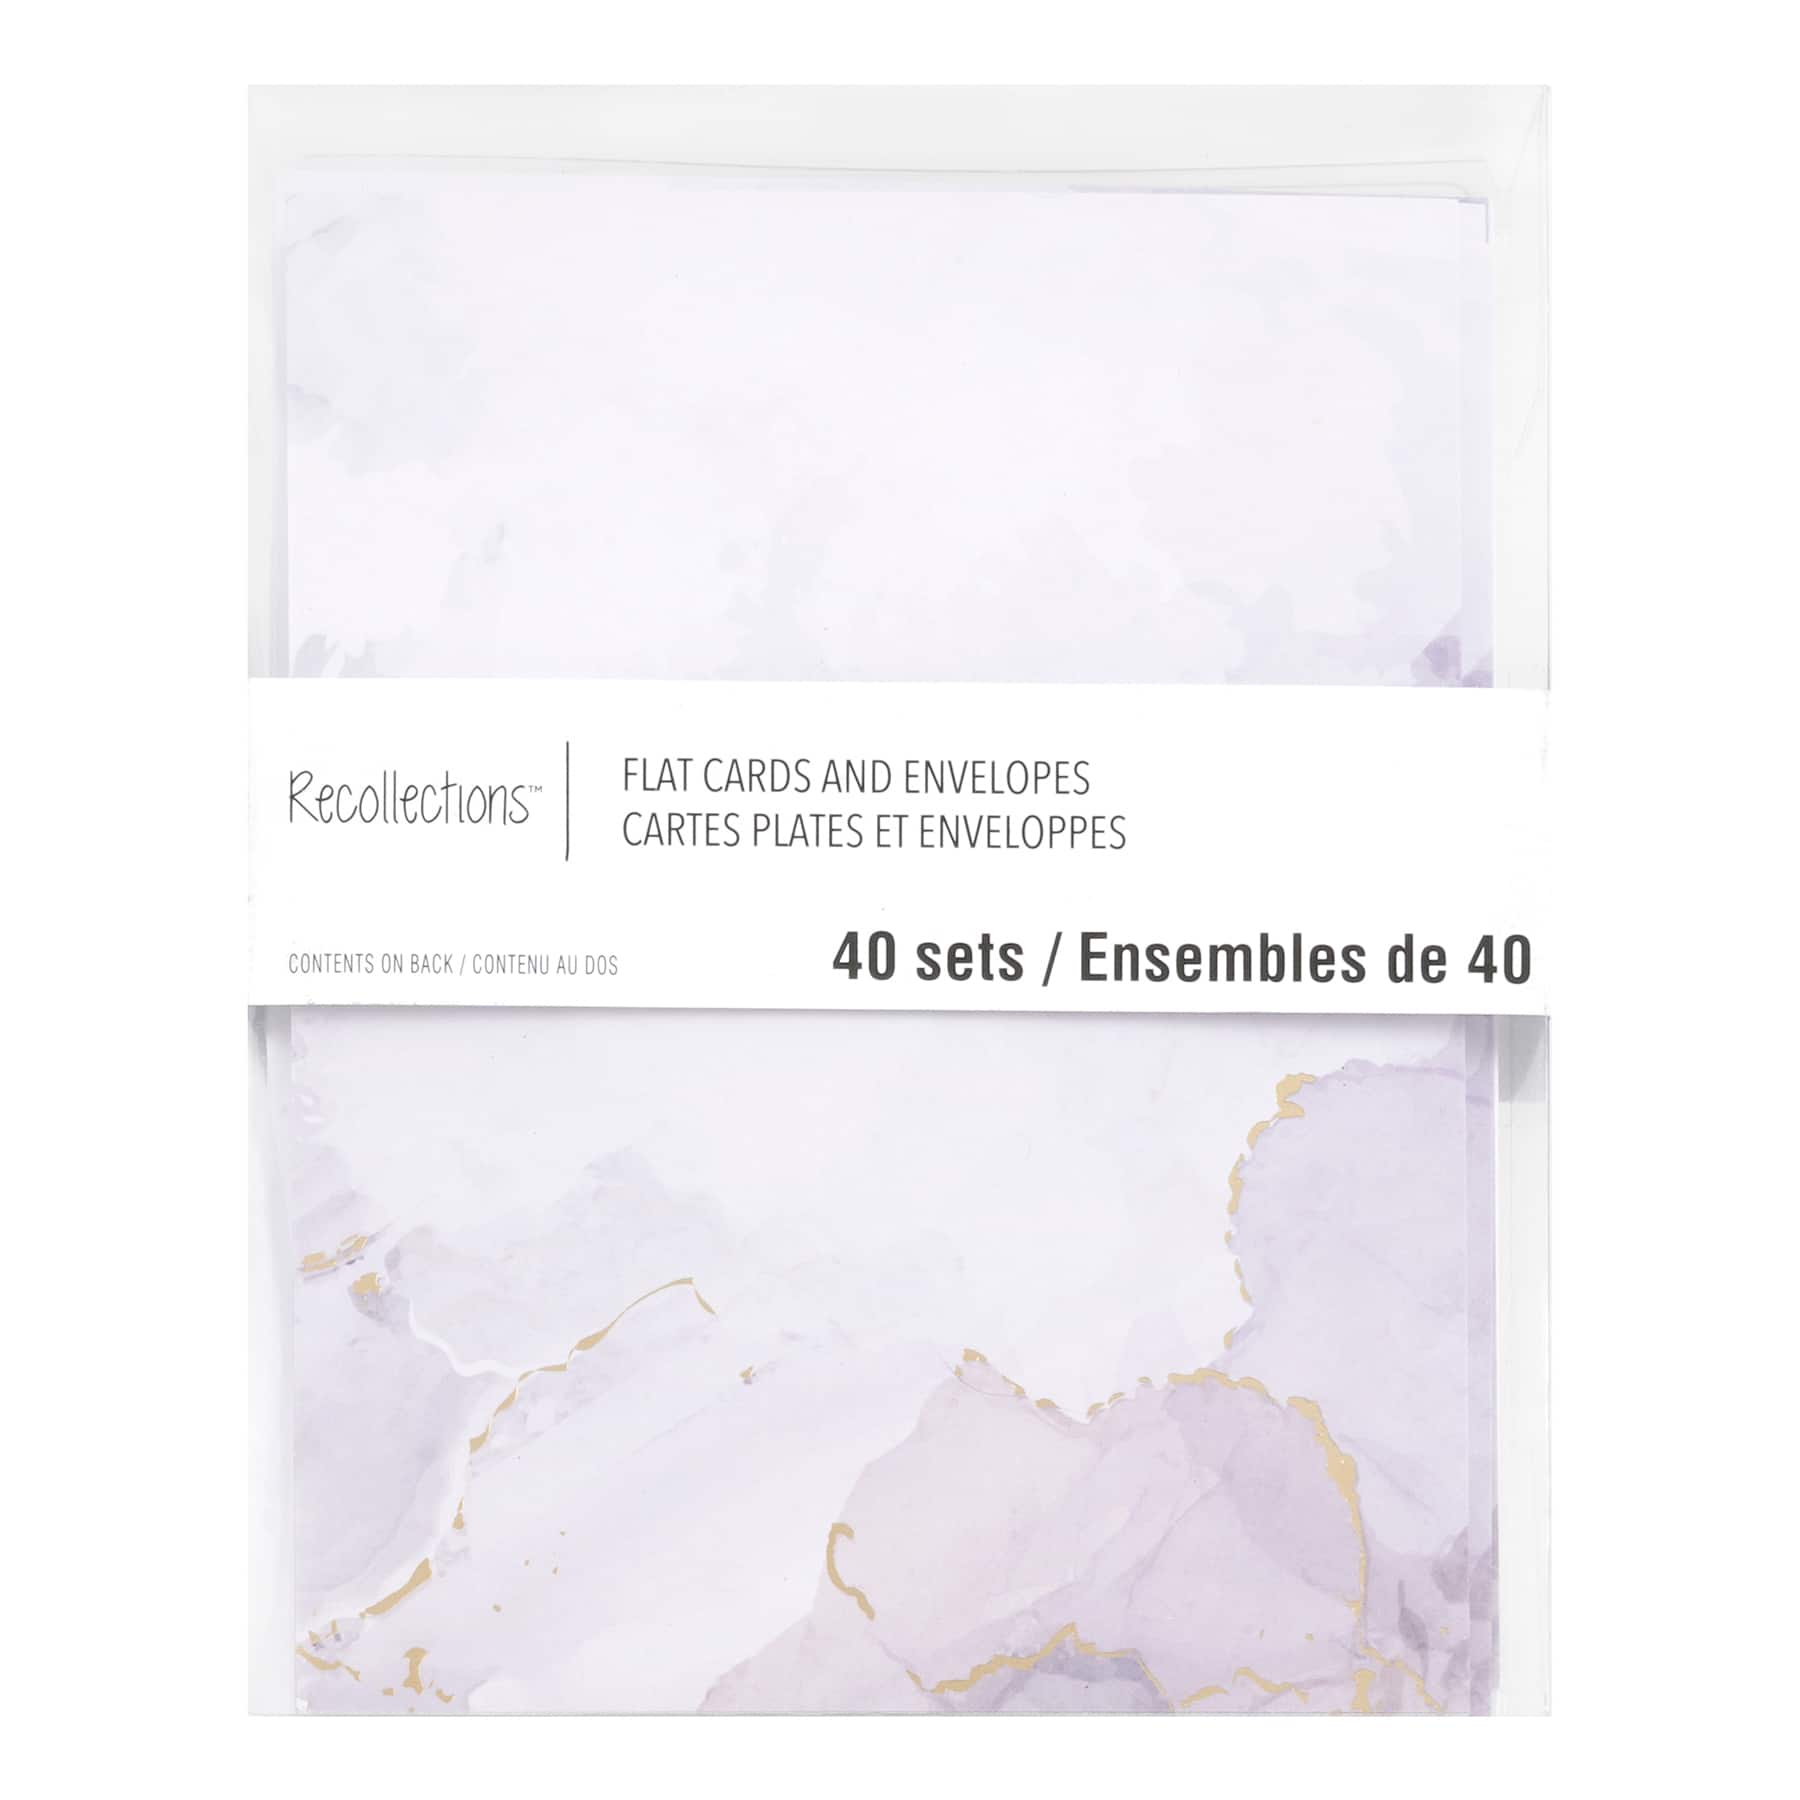 Clear Card Sleeves by Recollections™, 3.5 x 4.875